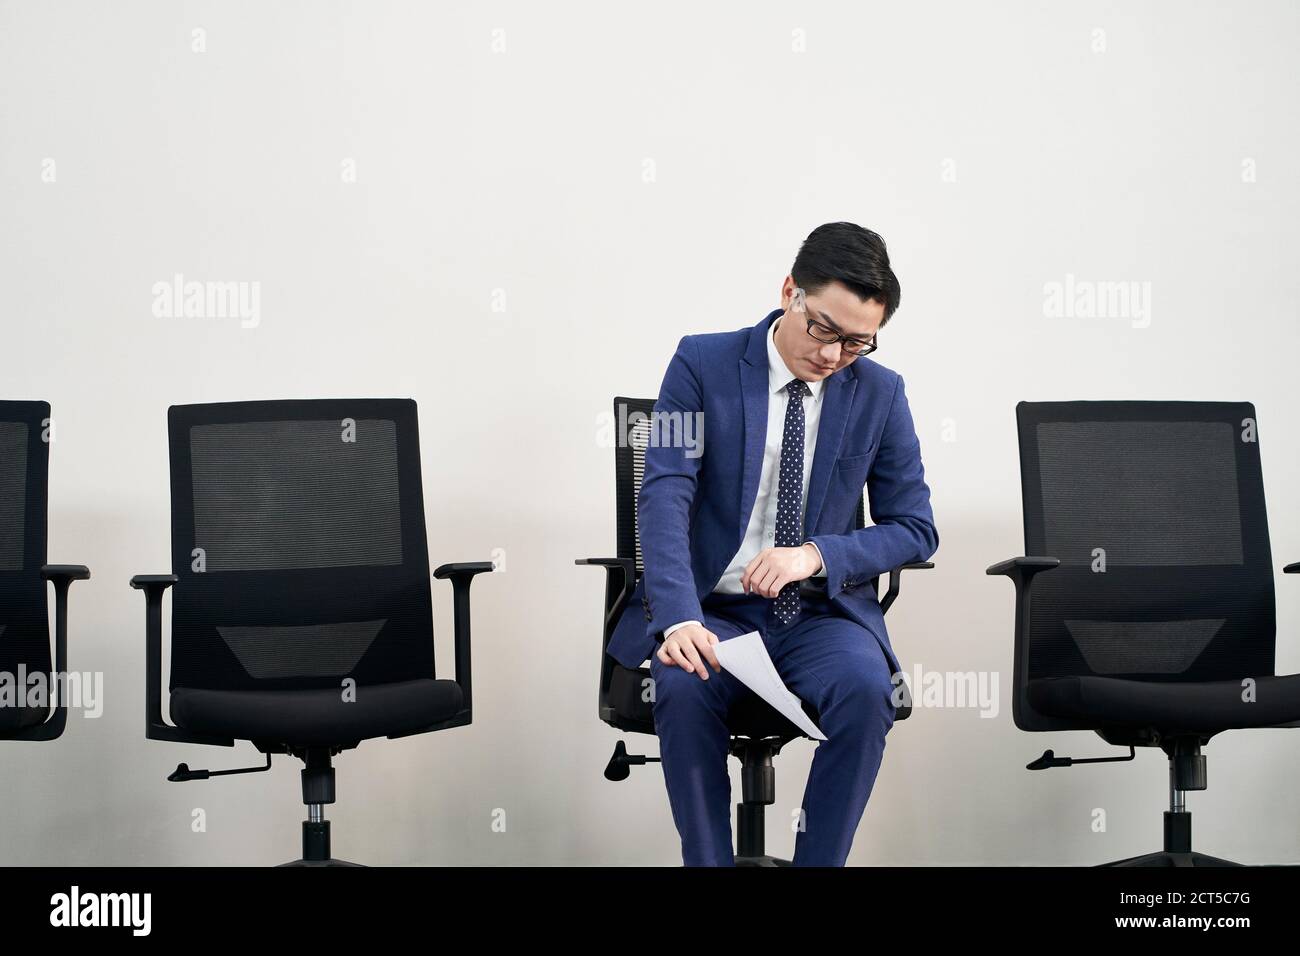 young asian male job seeker sitting in chair with head down appears to be frustrated and defeated Stock Photo